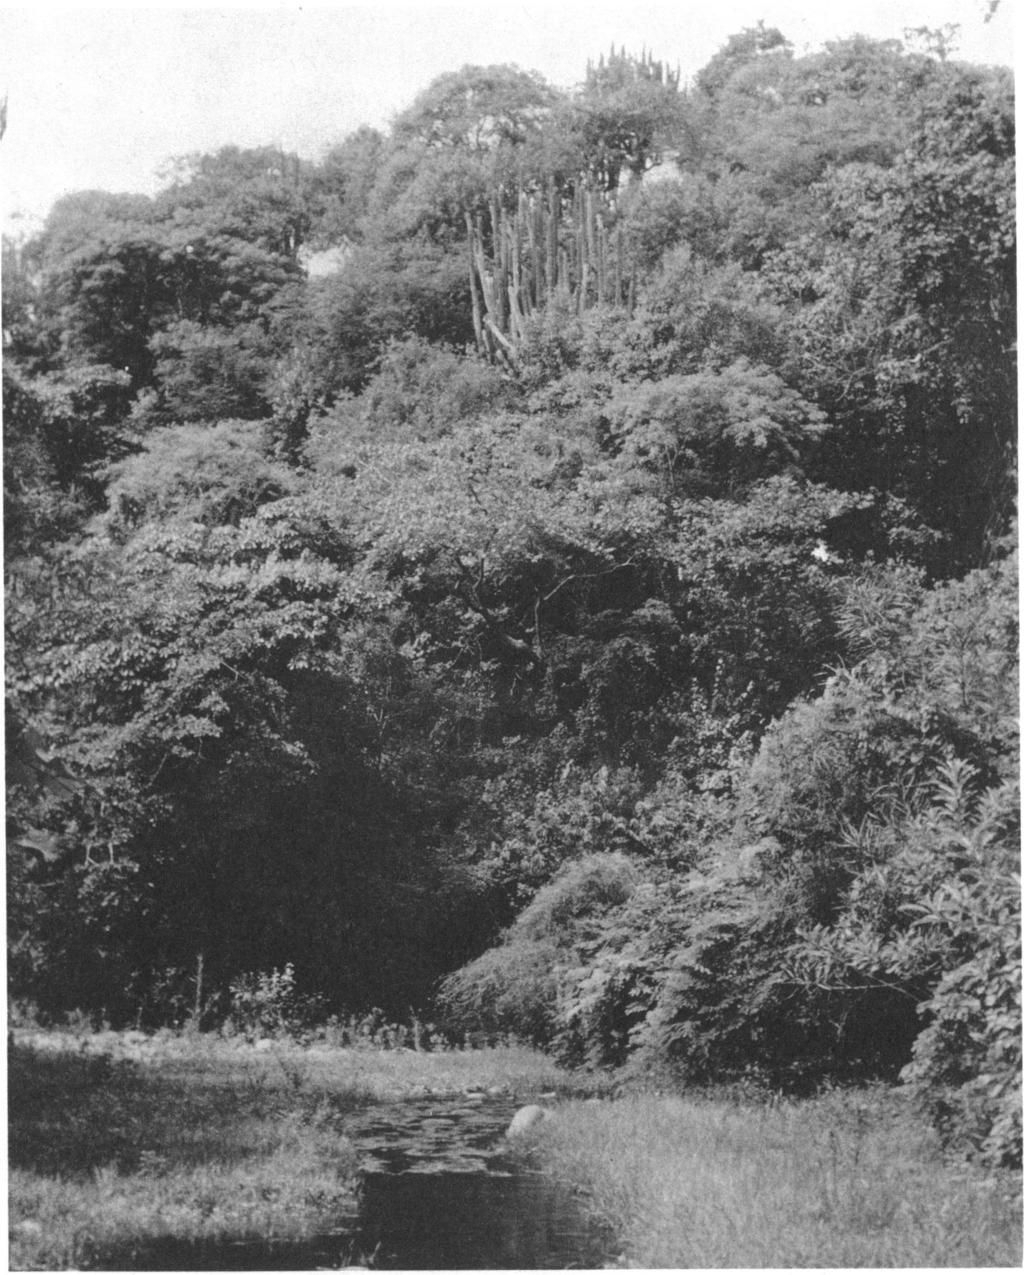 34 AMERICAN MUSEUM NOVITATES NO. 2431 FIG. 12. Riparian tropical deciduous forest in which Sceloporus melanorhinus inhabits the largest trees. Two miles (by Mex.